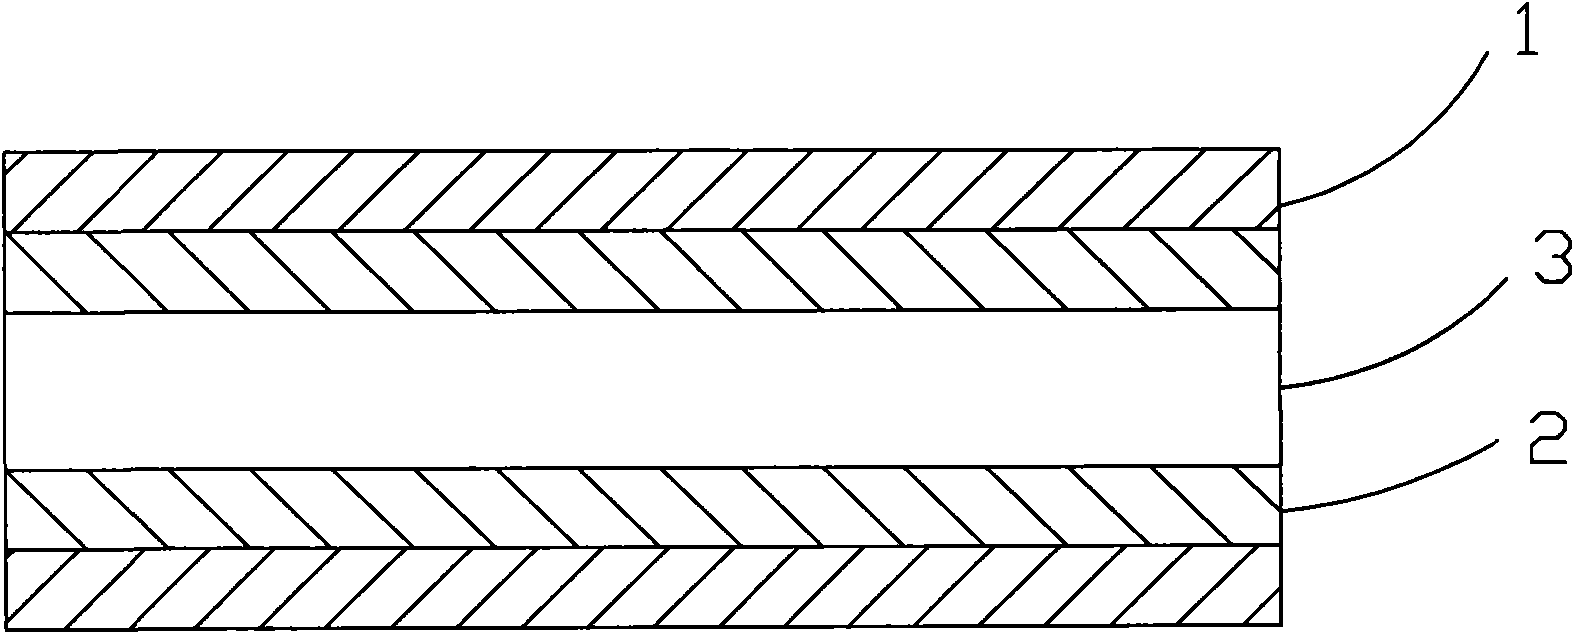 Two-layer-process double-sided flexible copper-clad laminate (CCL) and manufacture method thereof